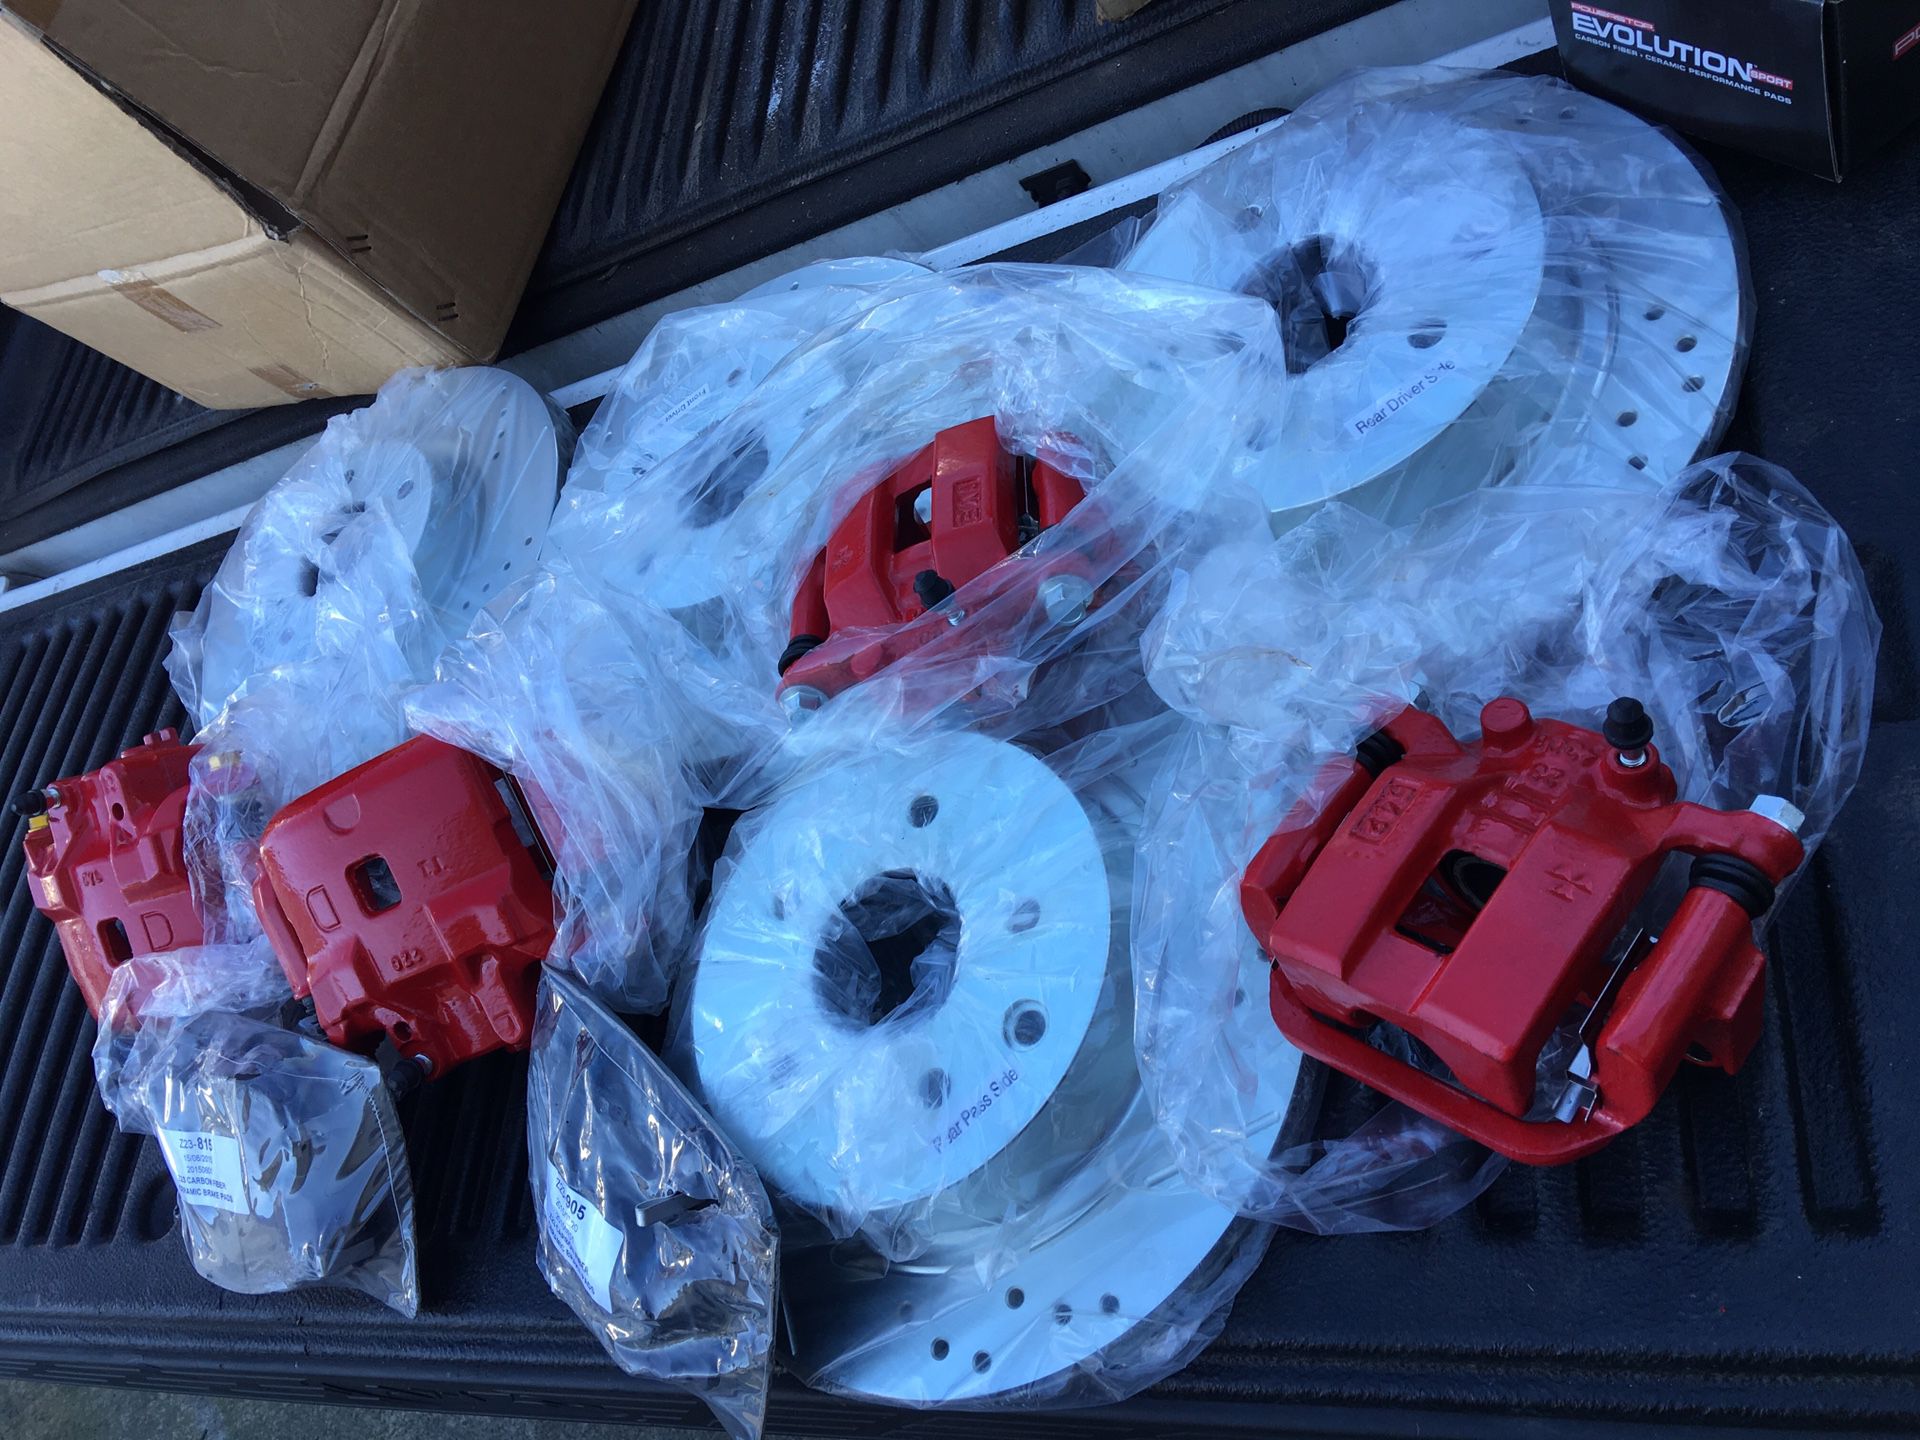 03-05 Nissan and Infiniti brand new calipers, drilled rotors and brake pads